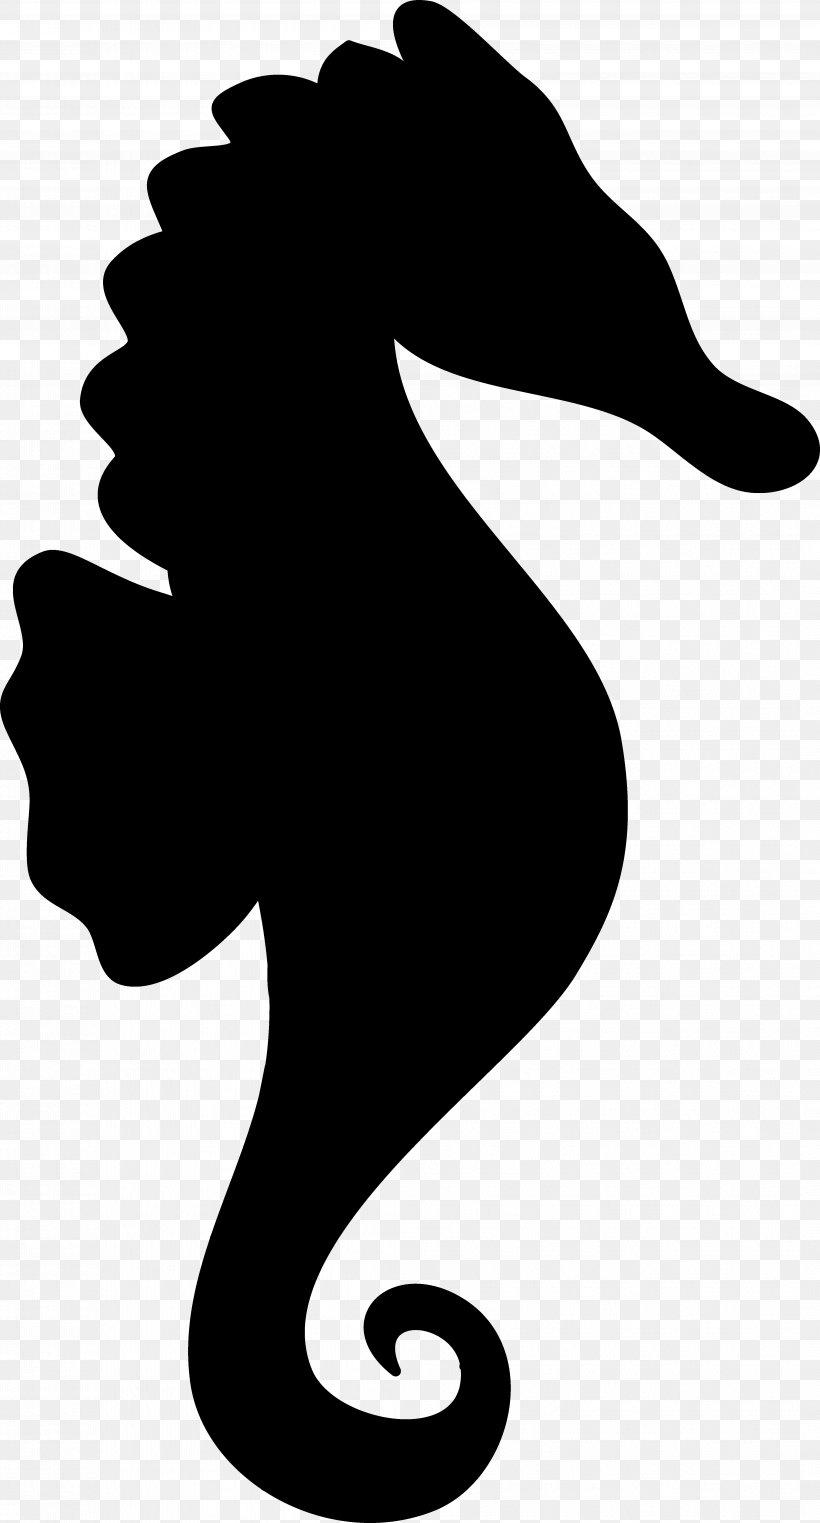 Clip Art Silhouette Female Woman Black And White, PNG, 4177x7763px, Silhouette, Black, Black And White, Blackandwhite, Female Download Free